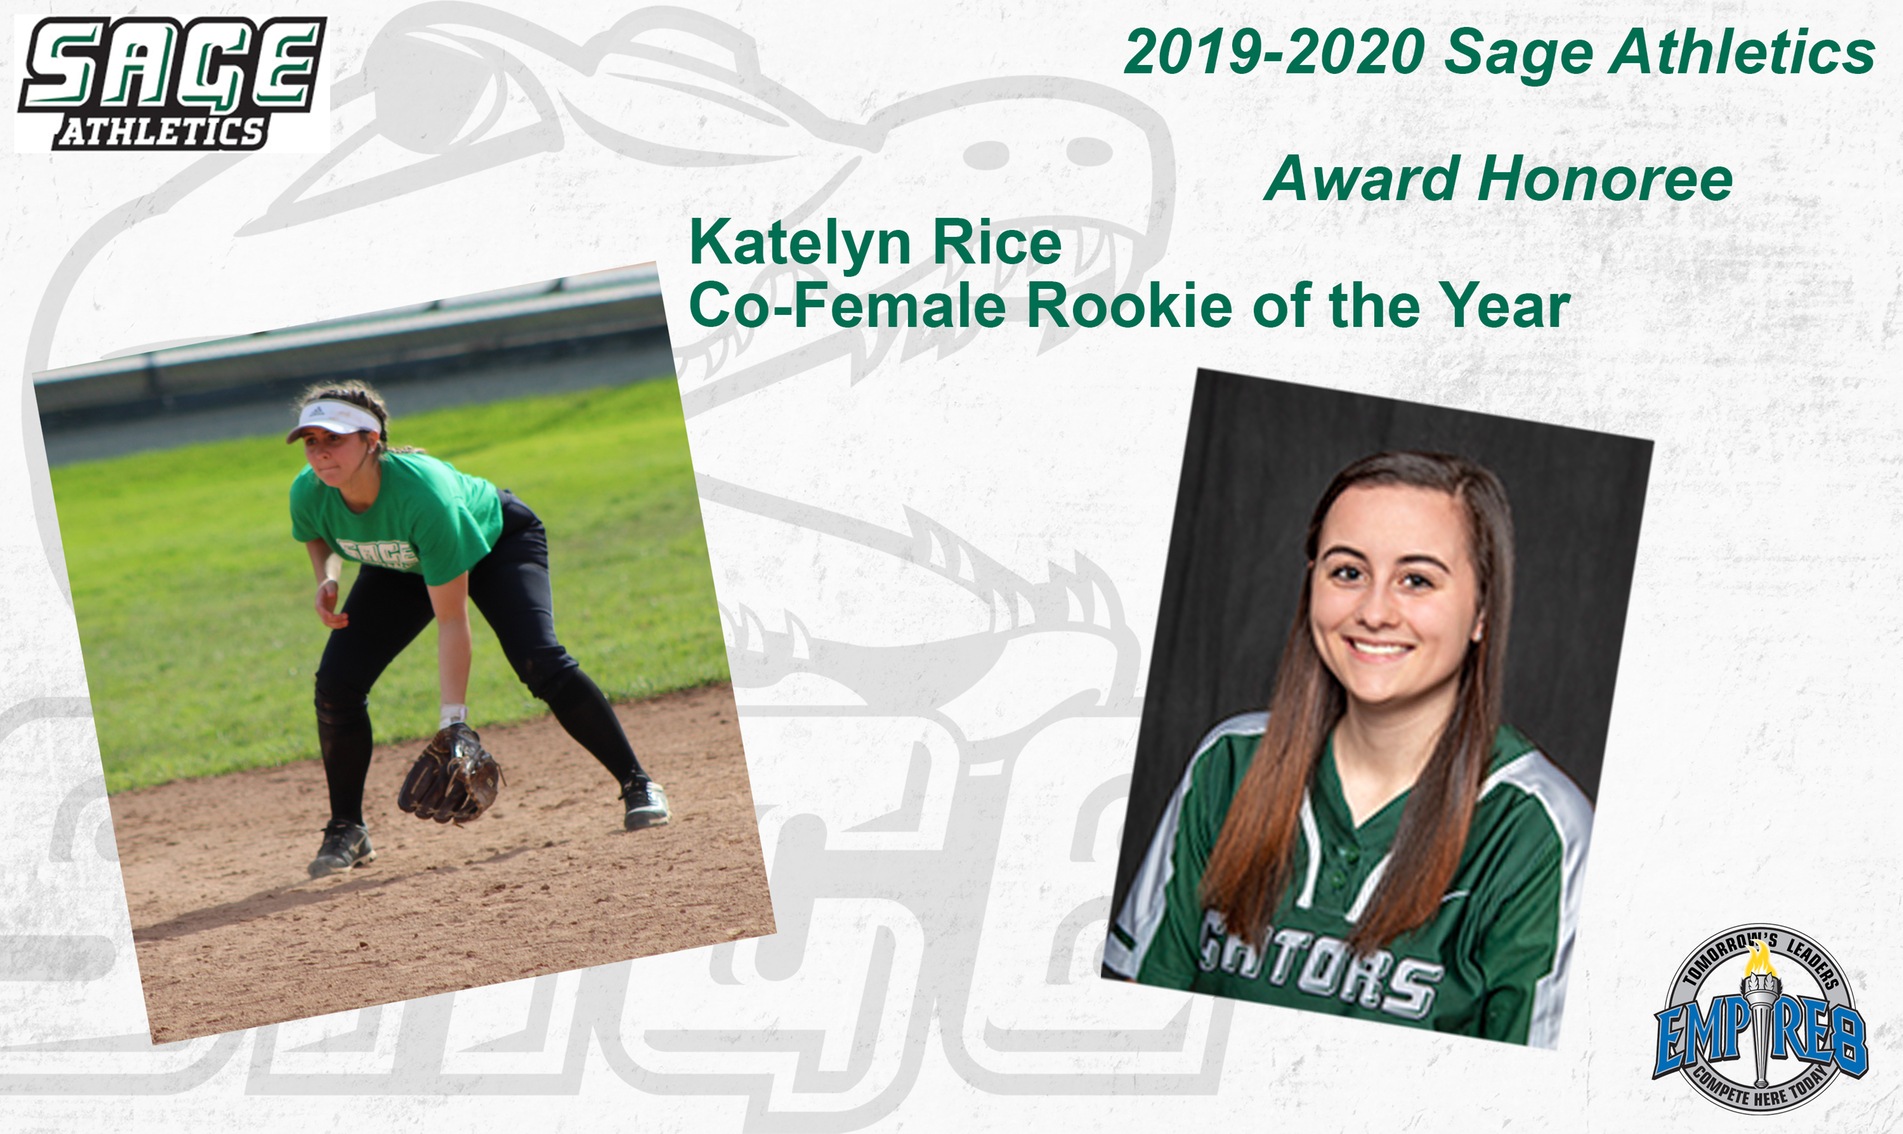 Rice honored as Sage's Female Co-Rookie of the Year